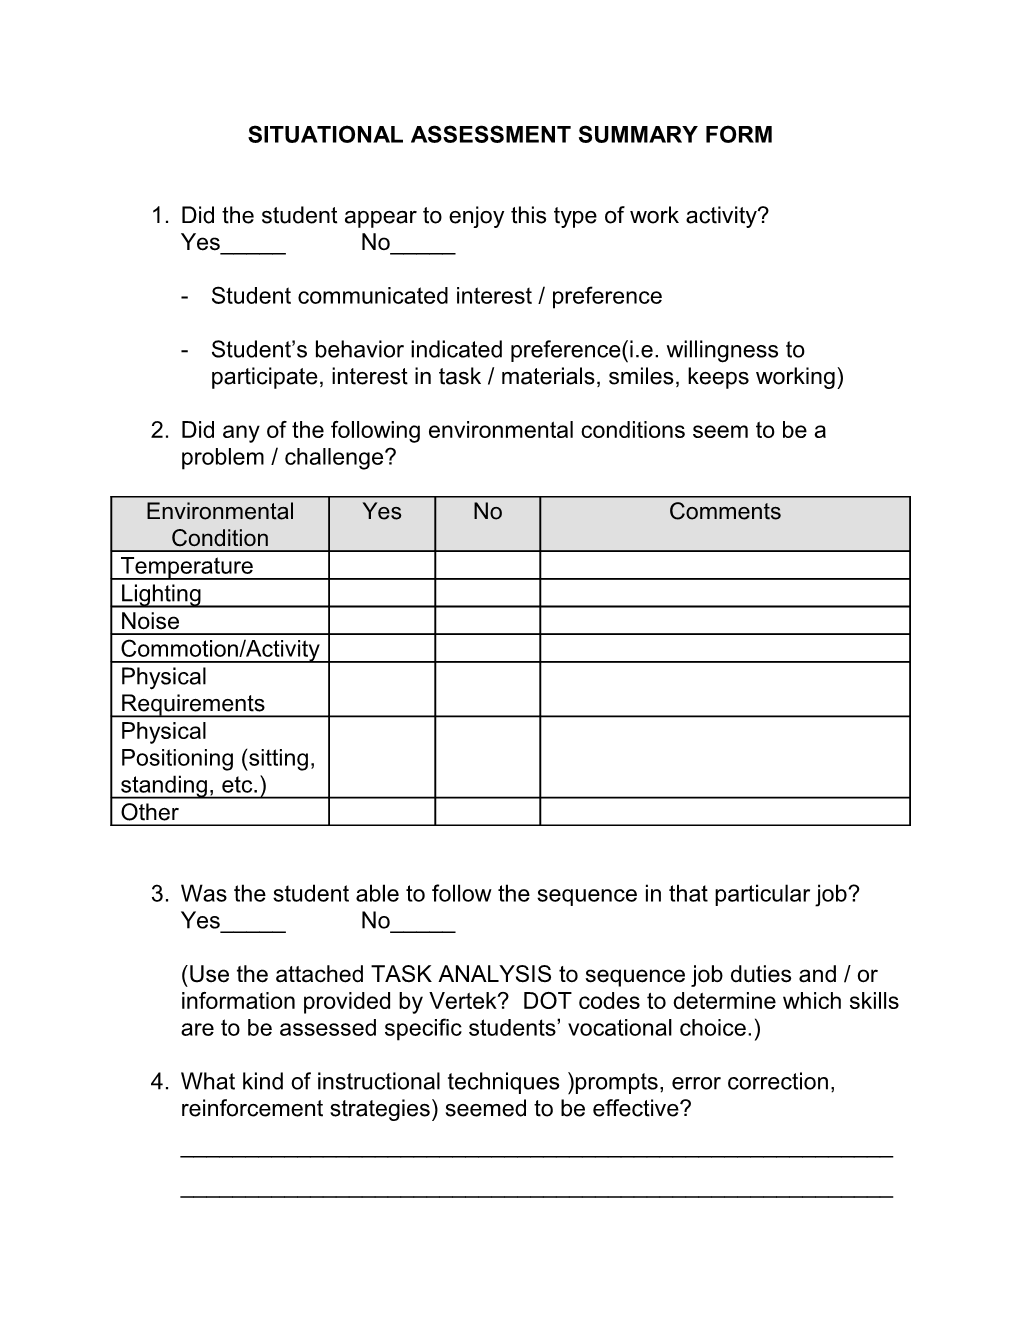 Situational Assessment Summary Form